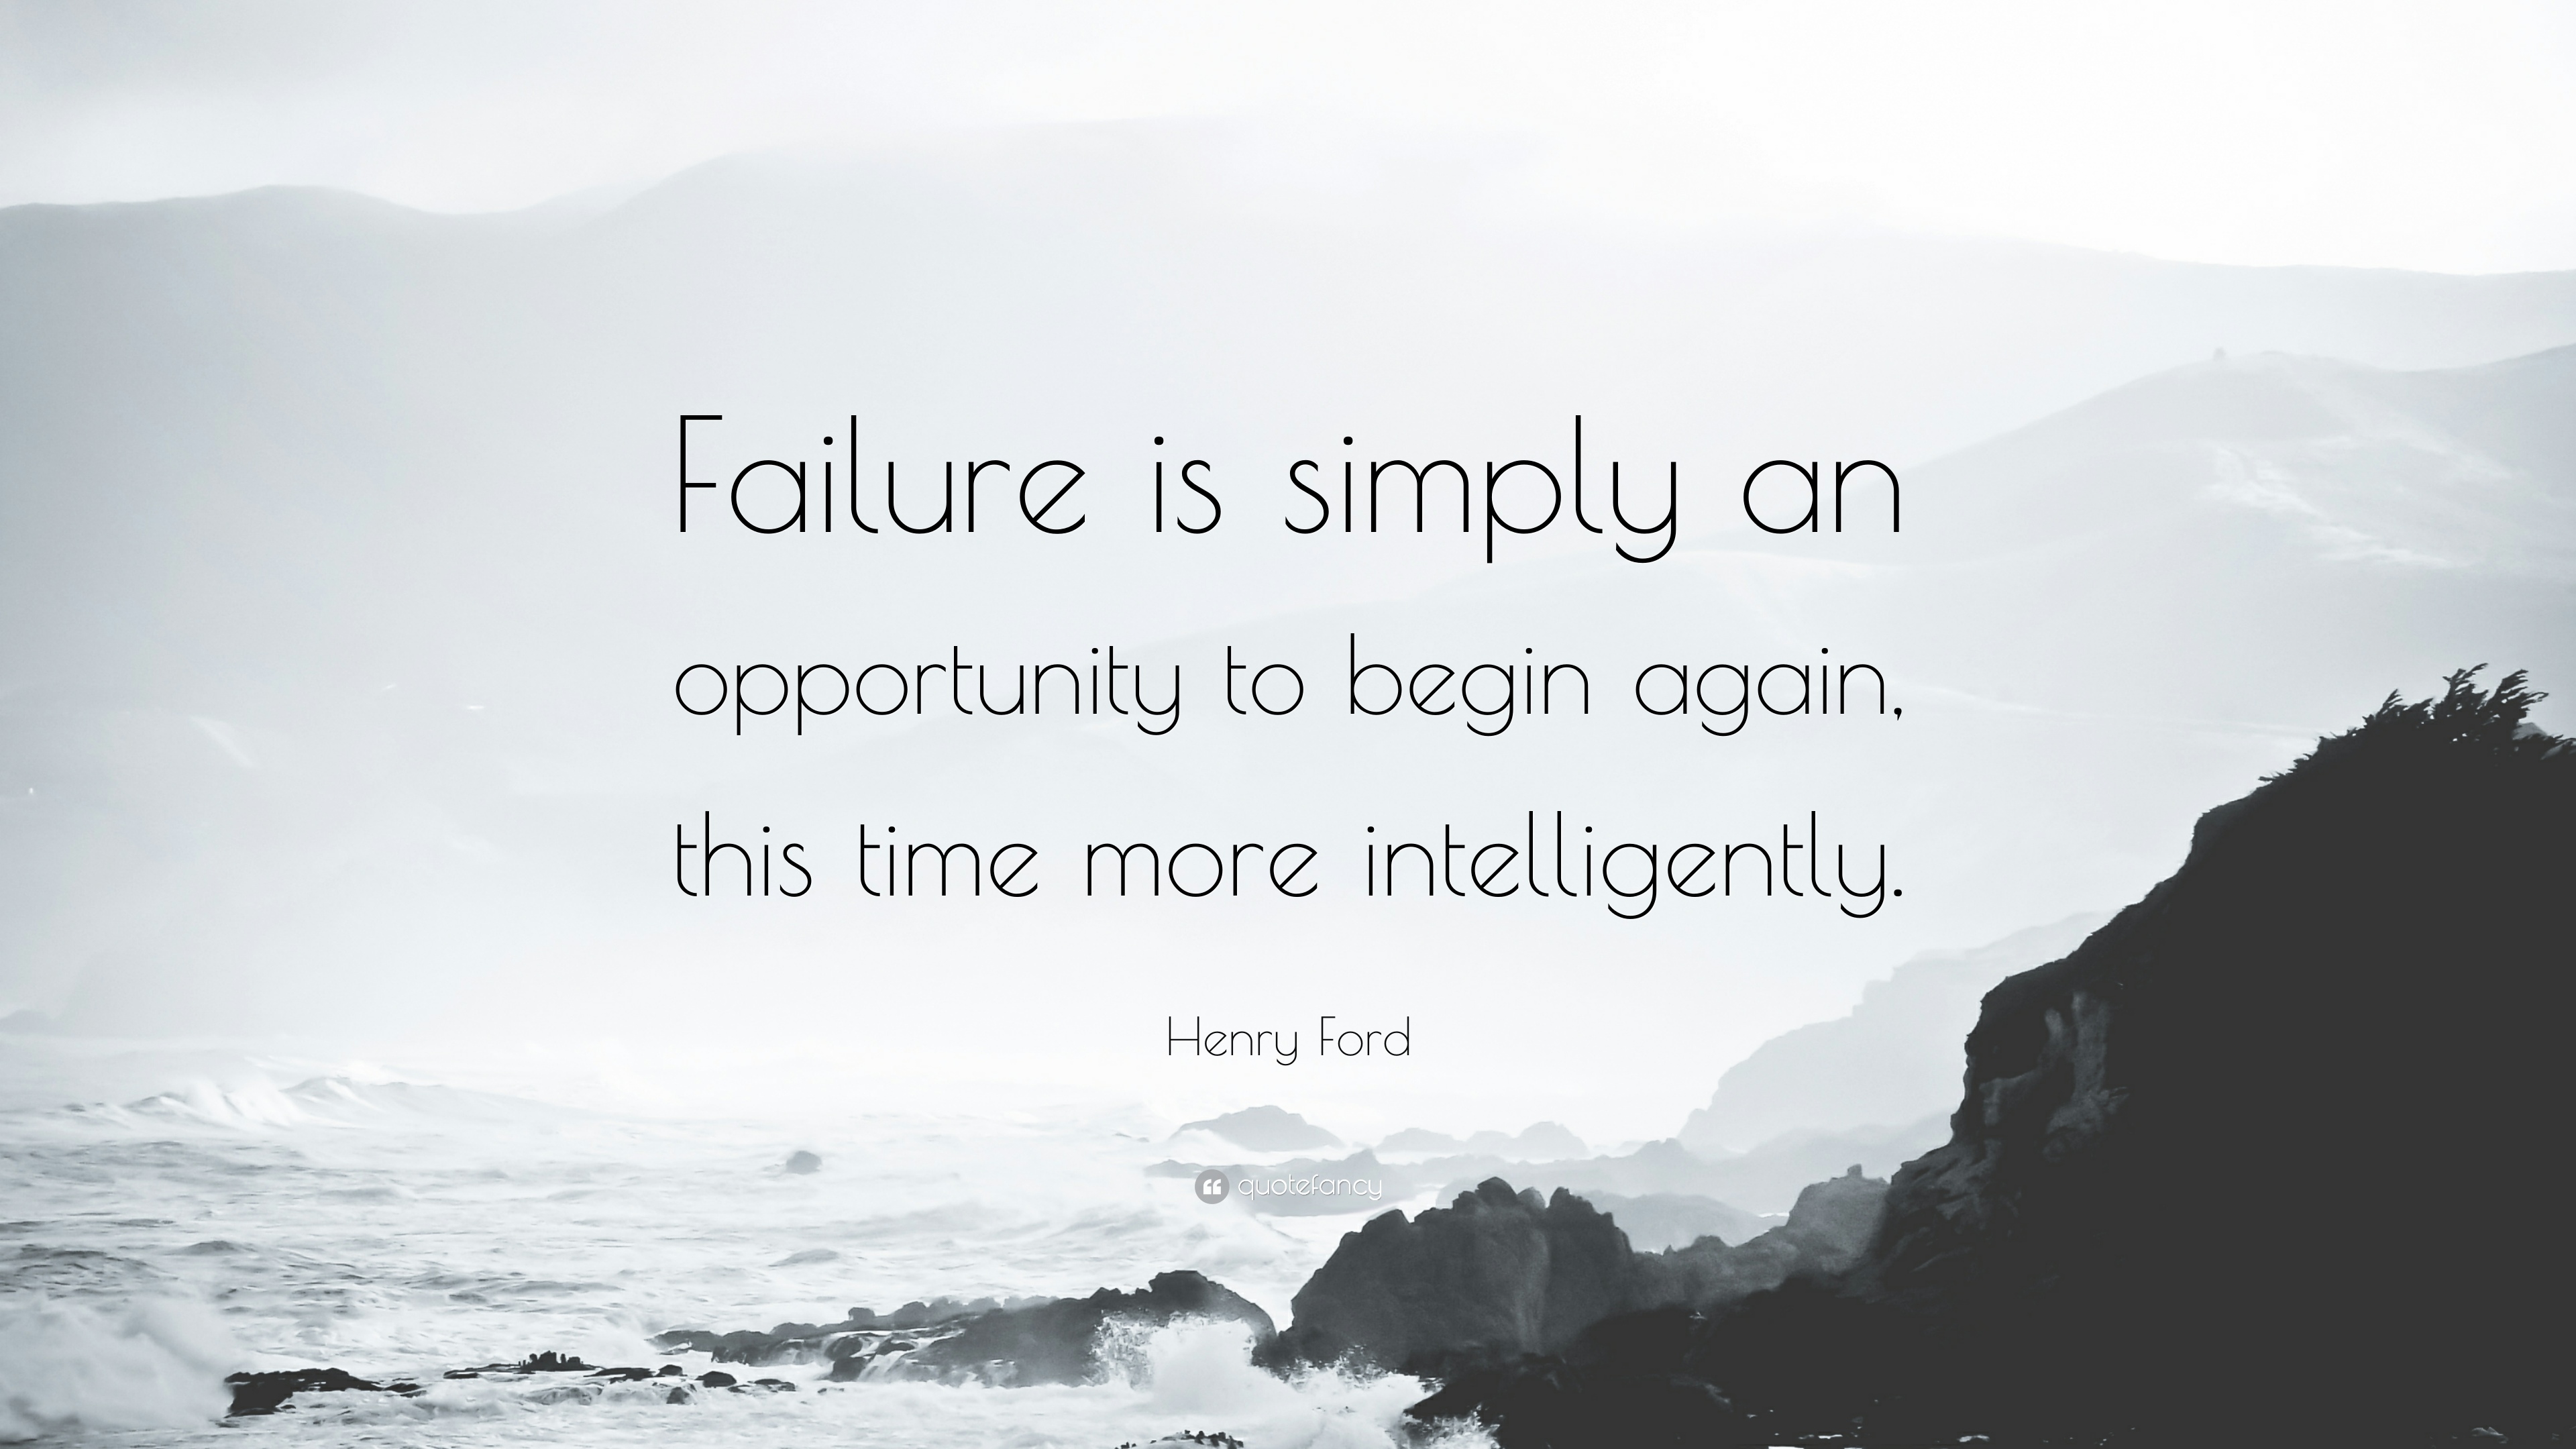 Failure is the opportunity